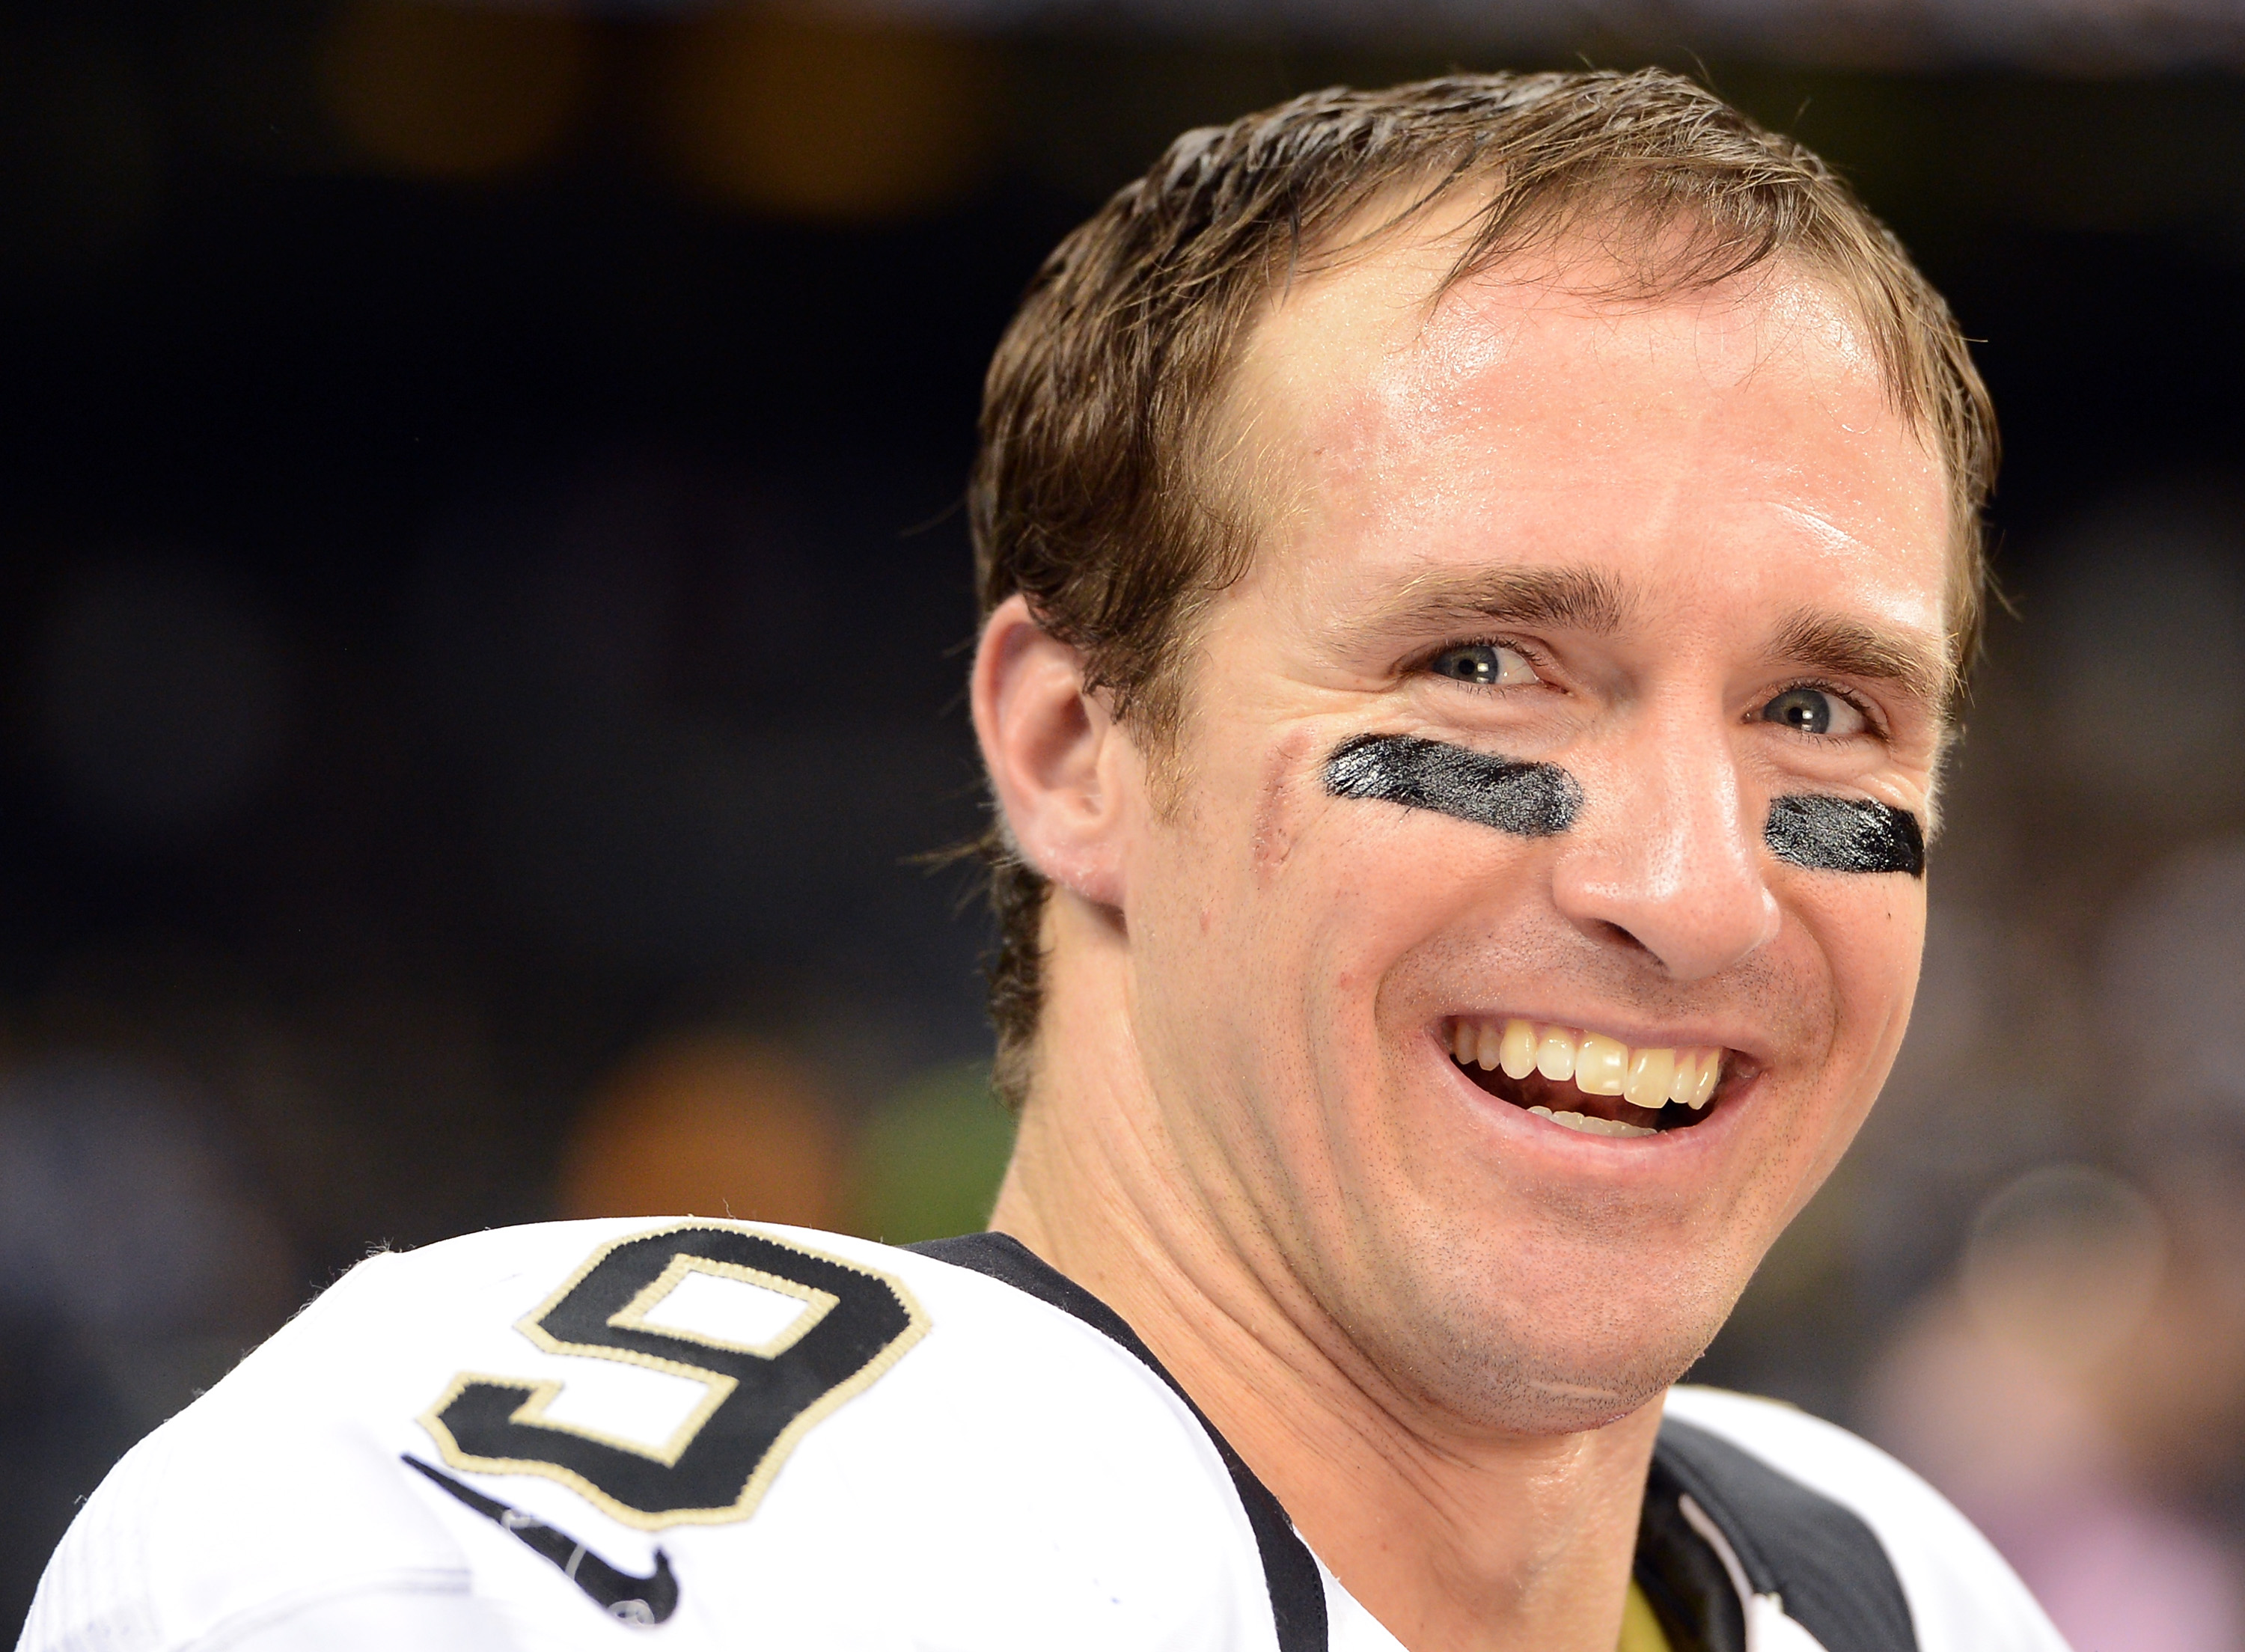 Drew Brees lawsuit claims his charity was cheated - CBS News